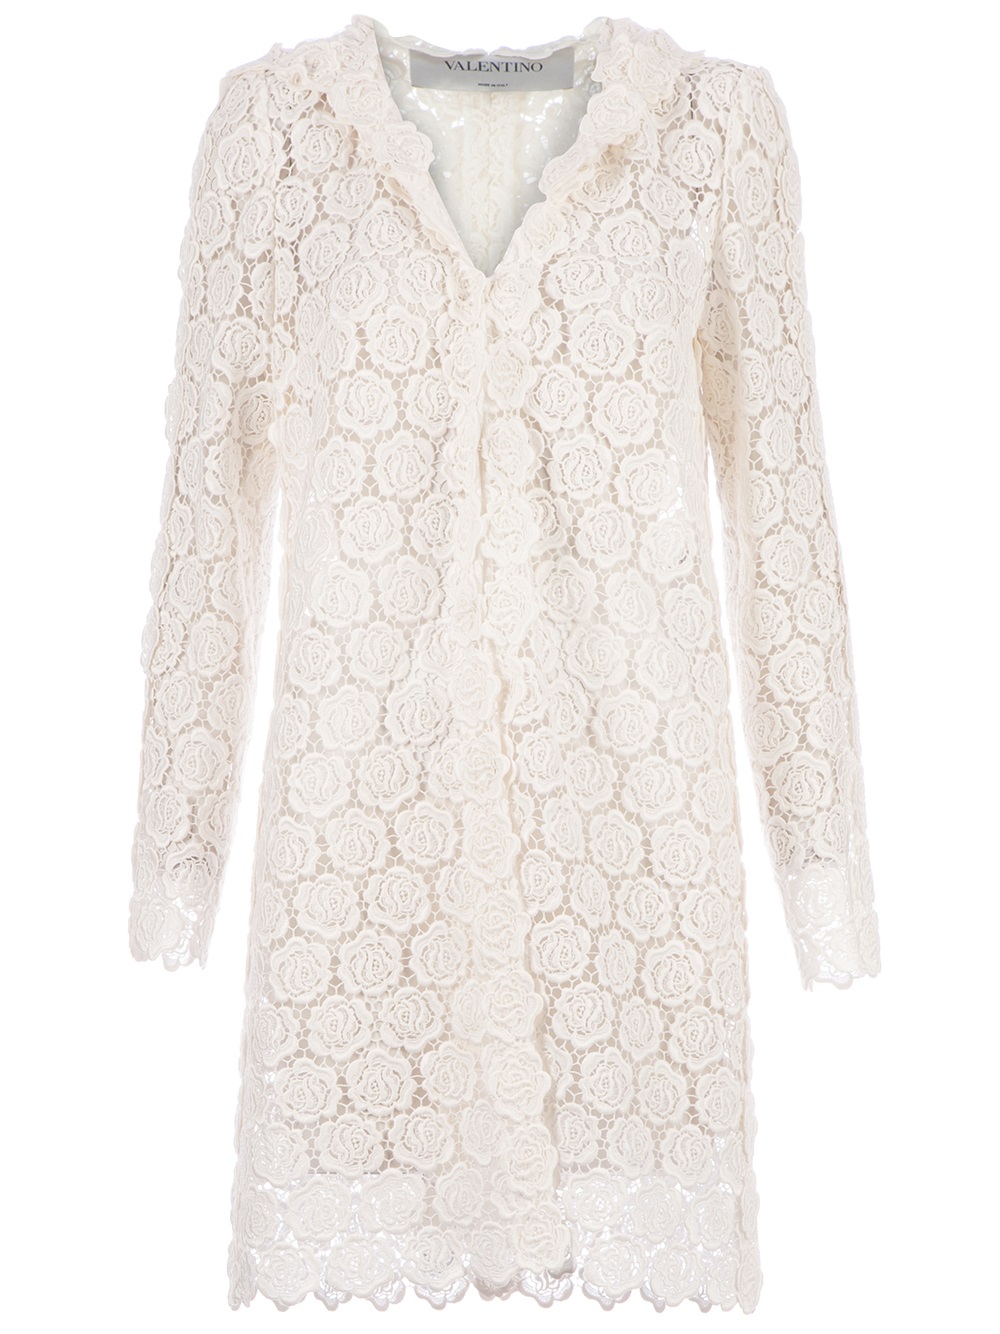 Valentino Boxy Floral Lace Dress in White (floral) | Lyst